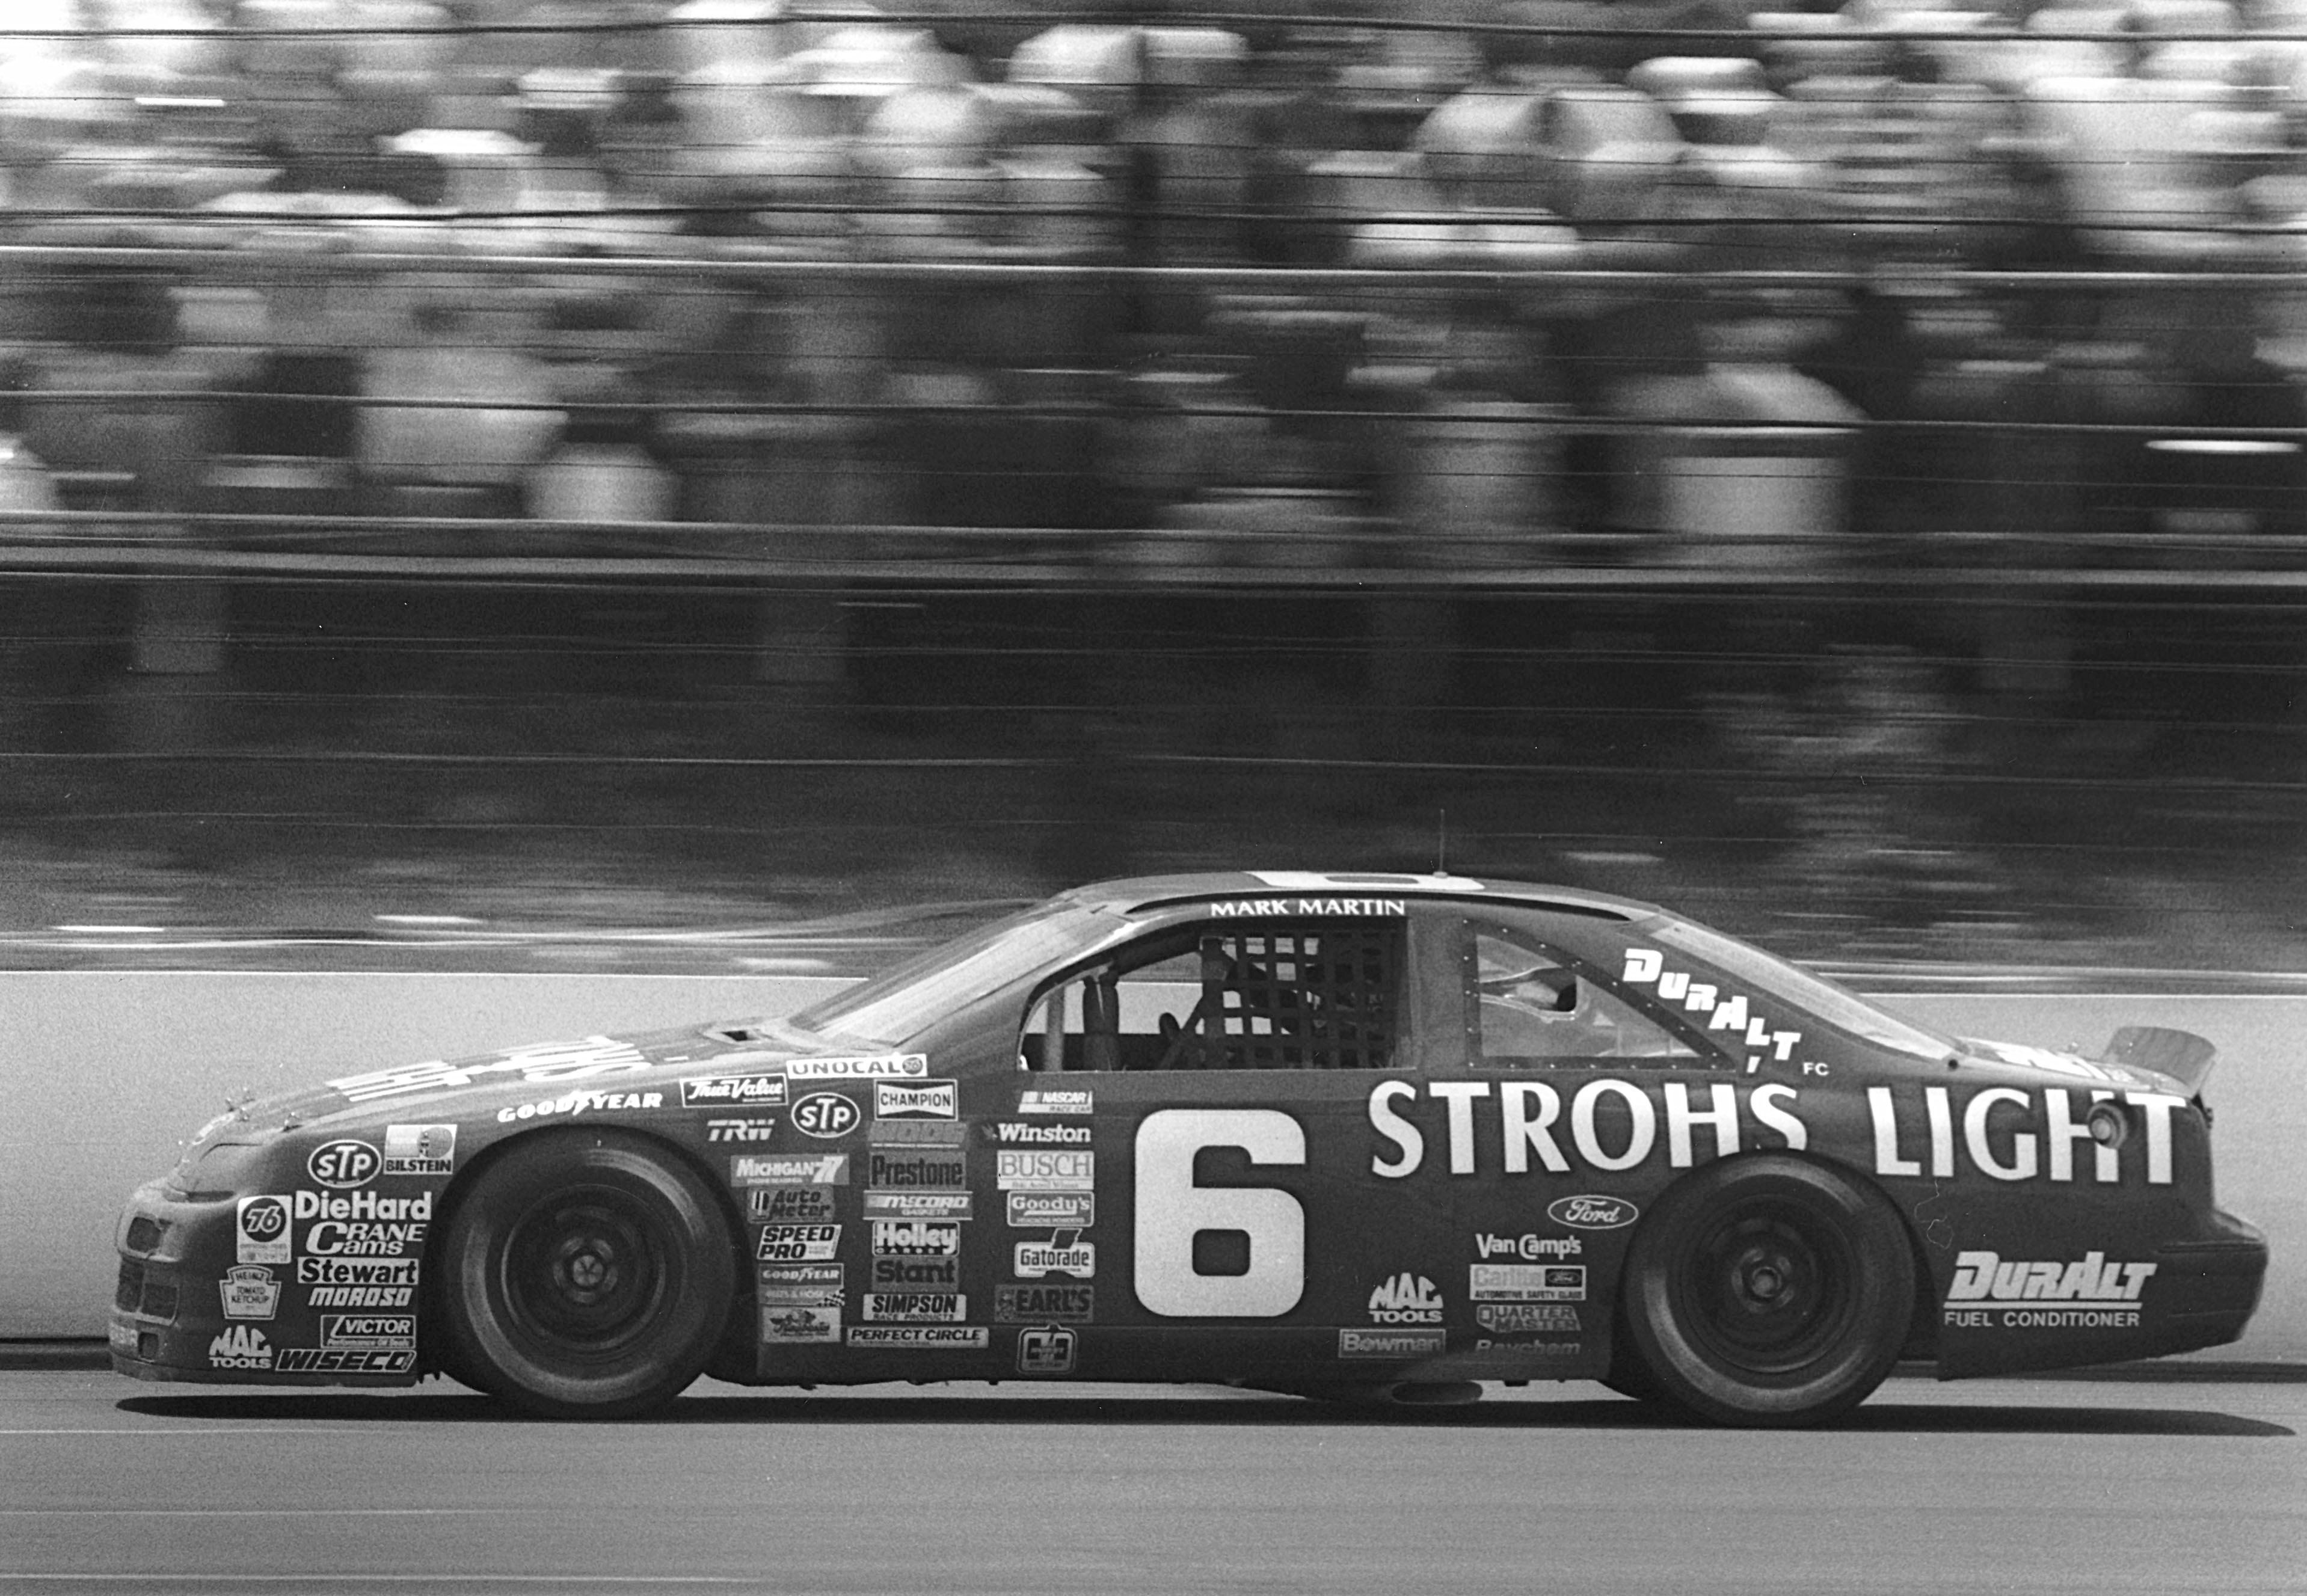 Mark Martin in the Number 6 car moves into second place during lap